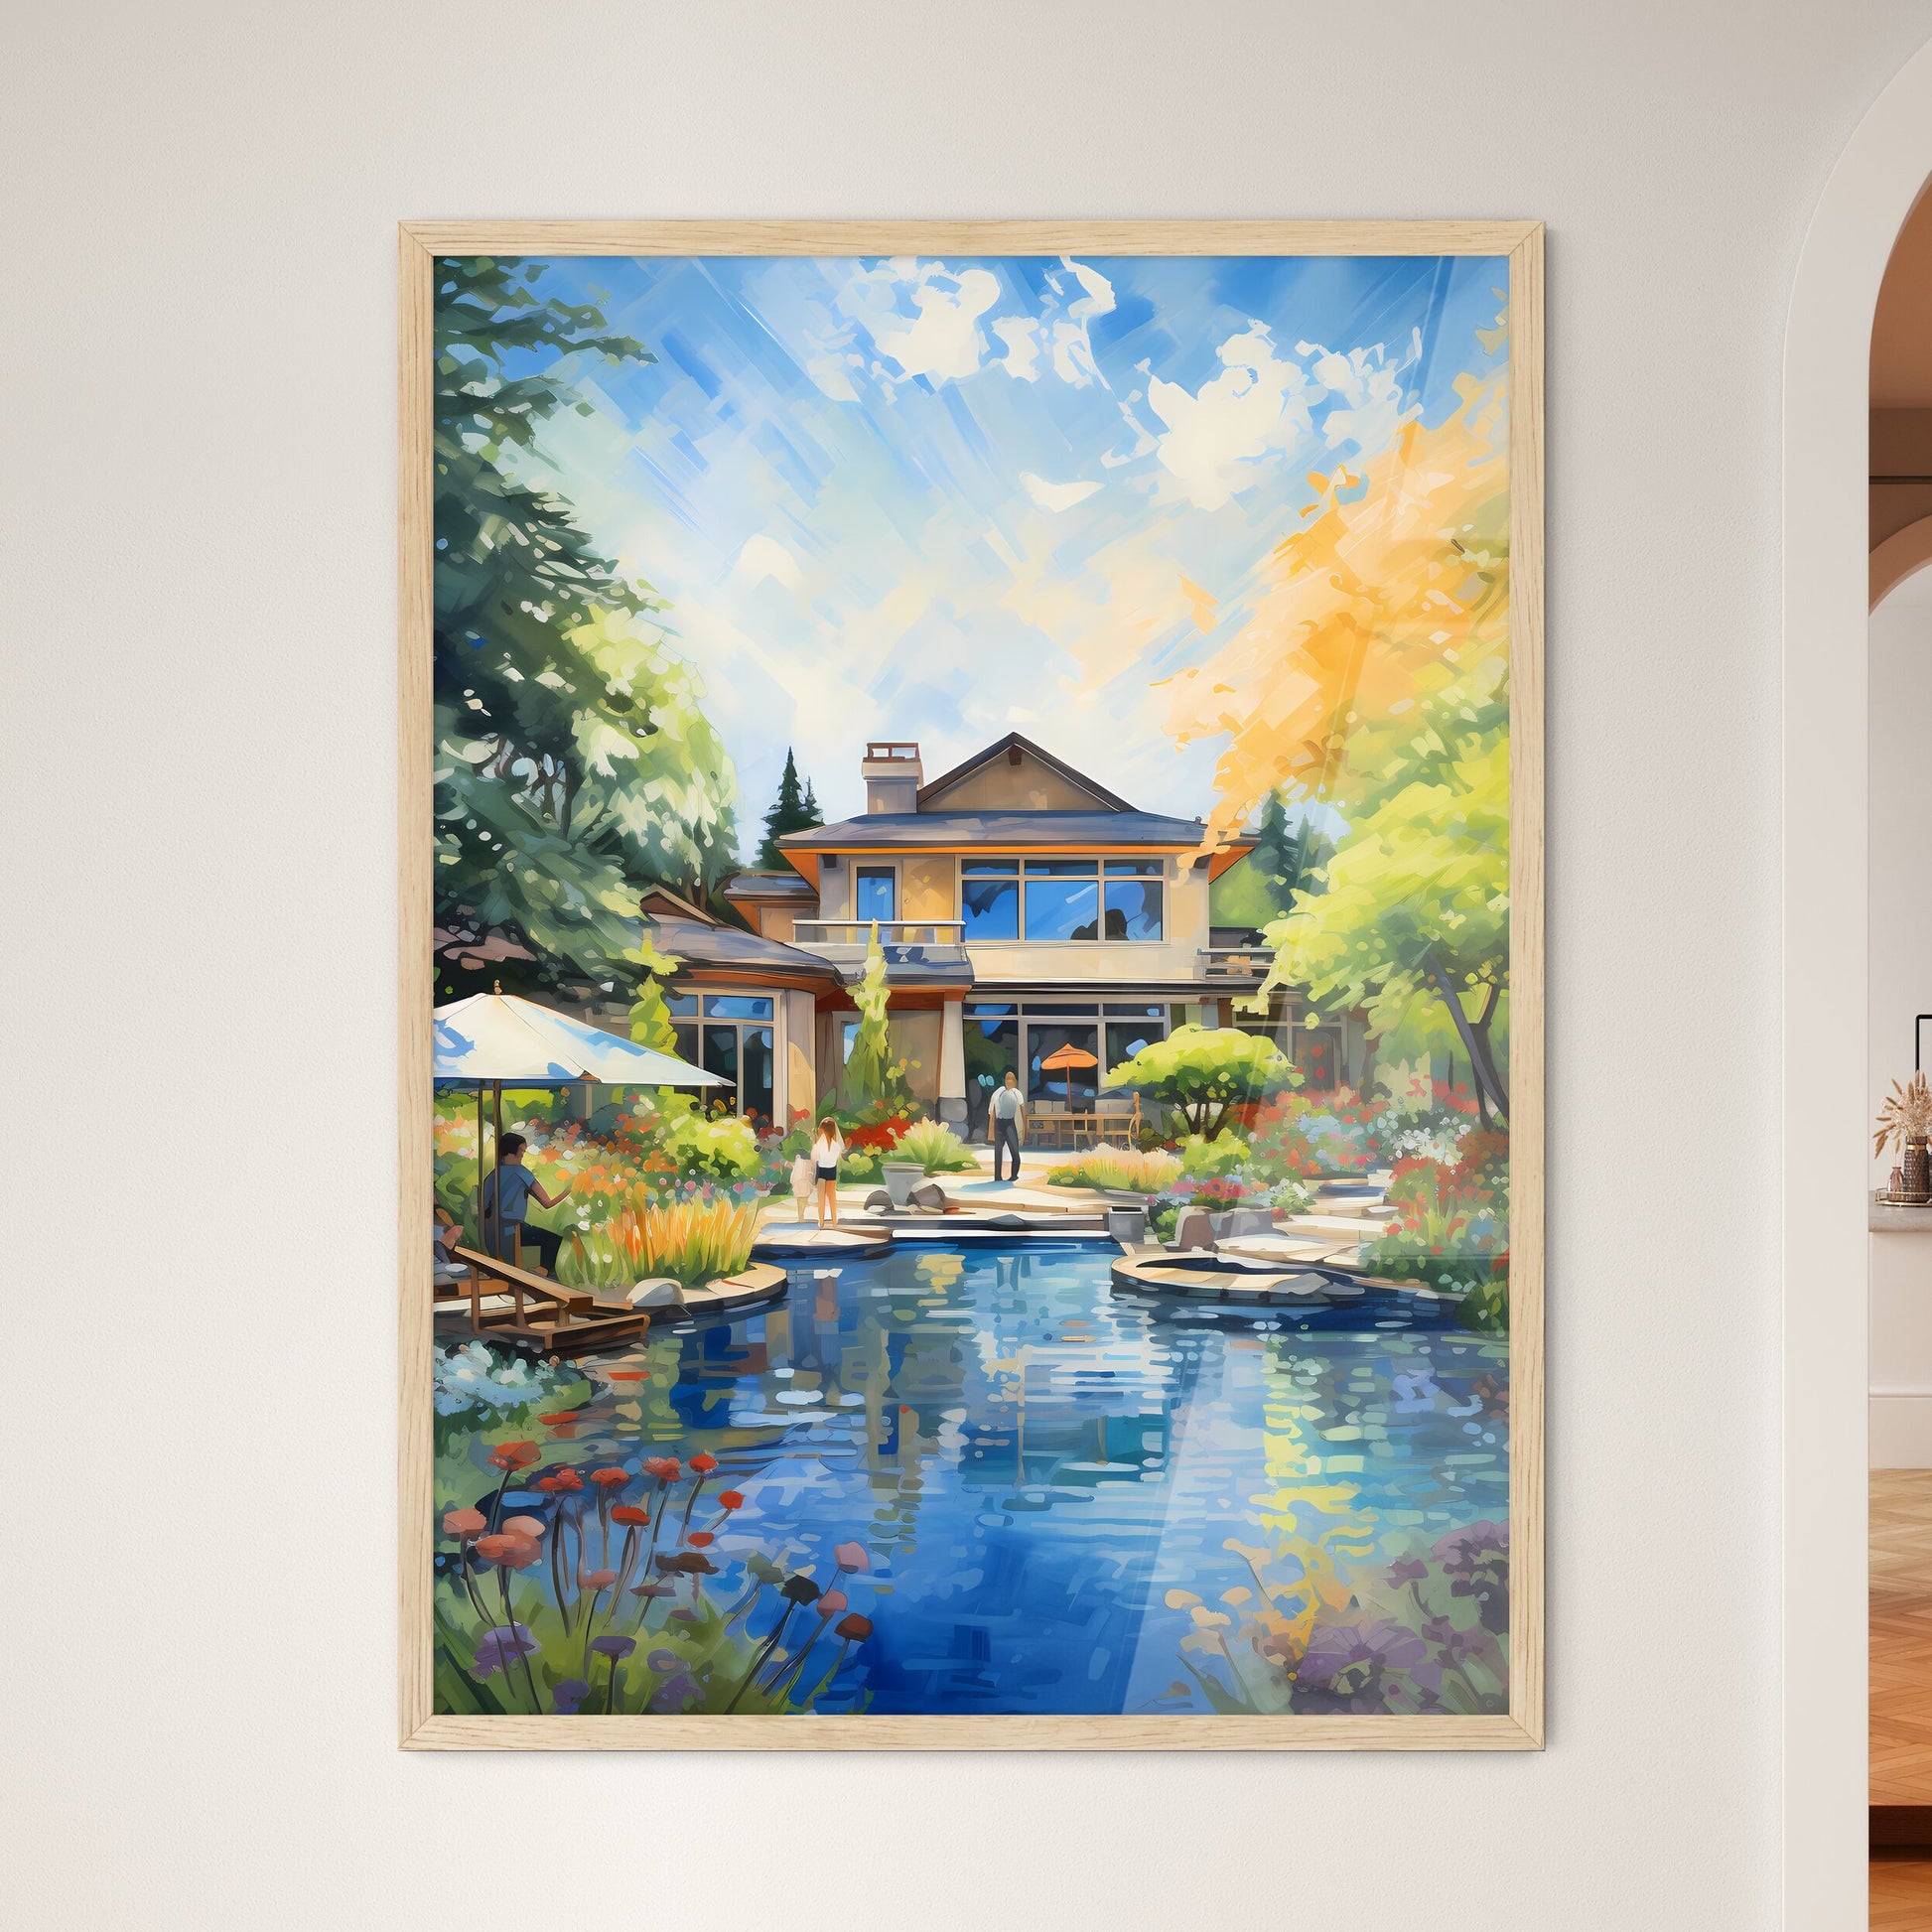 Painting Of A House With A Pond And Trees Art Print Default Title